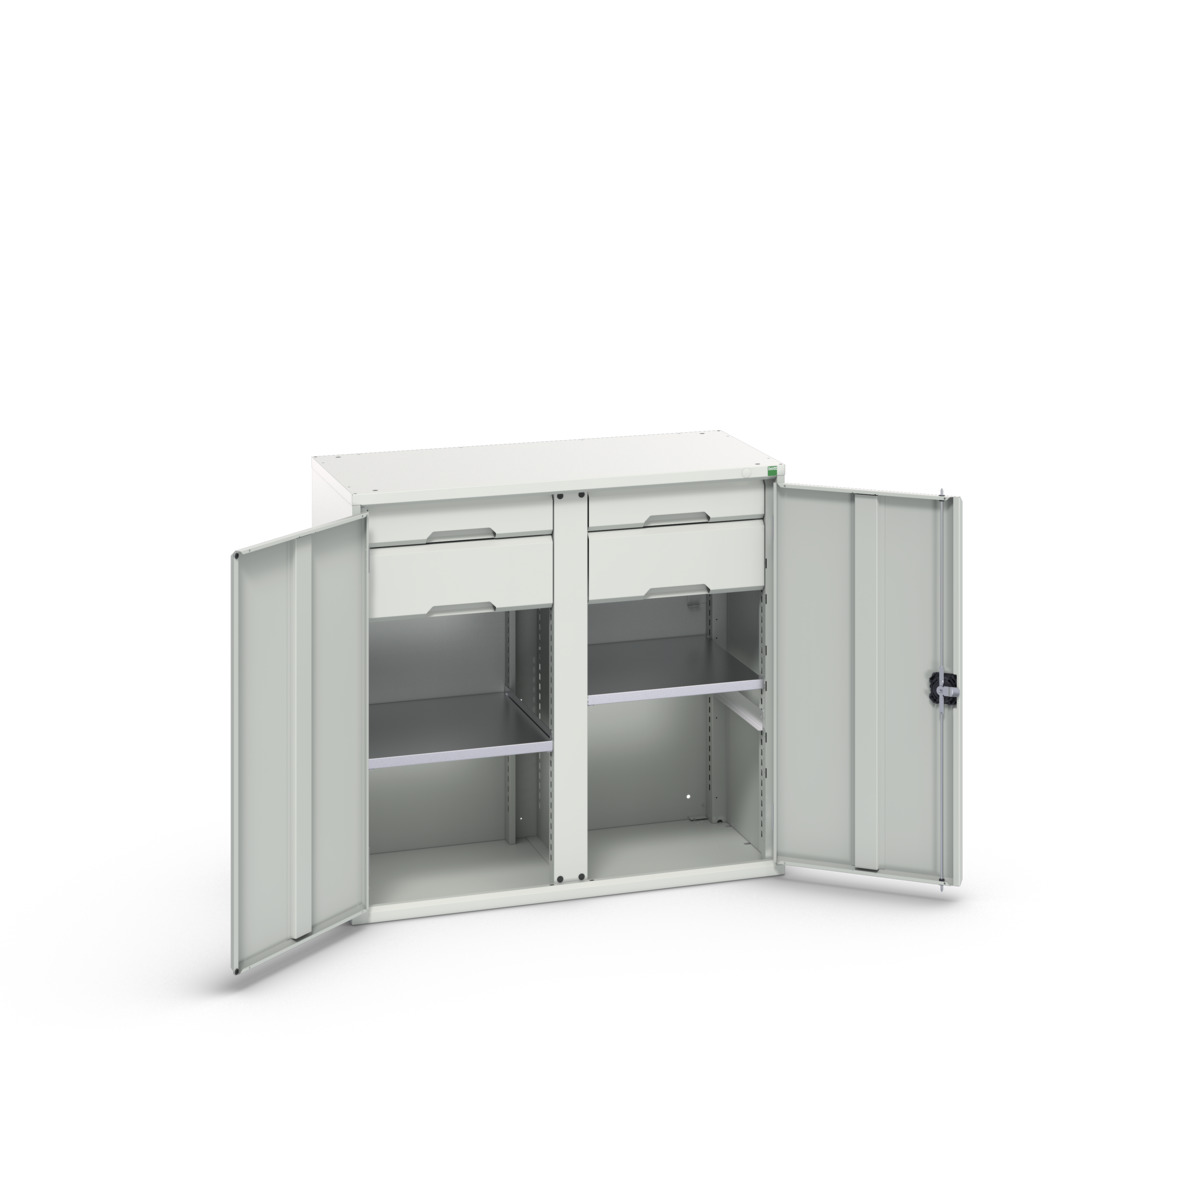 16926556.16 - verso kitted cupboard